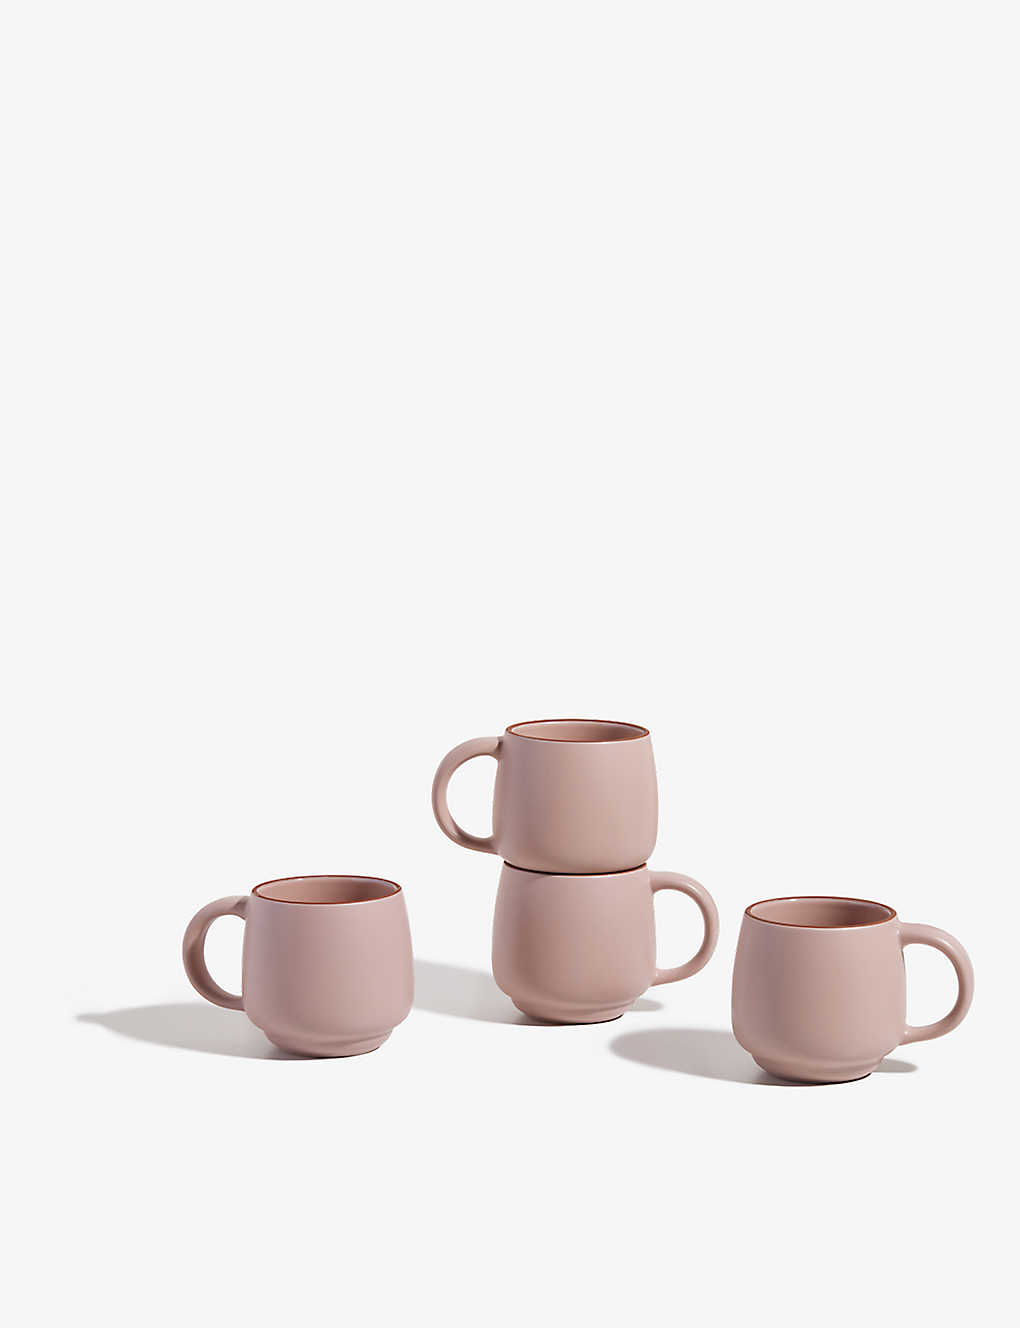 Our Place Spice Night + Day Ceramic Mugs Set Of Four